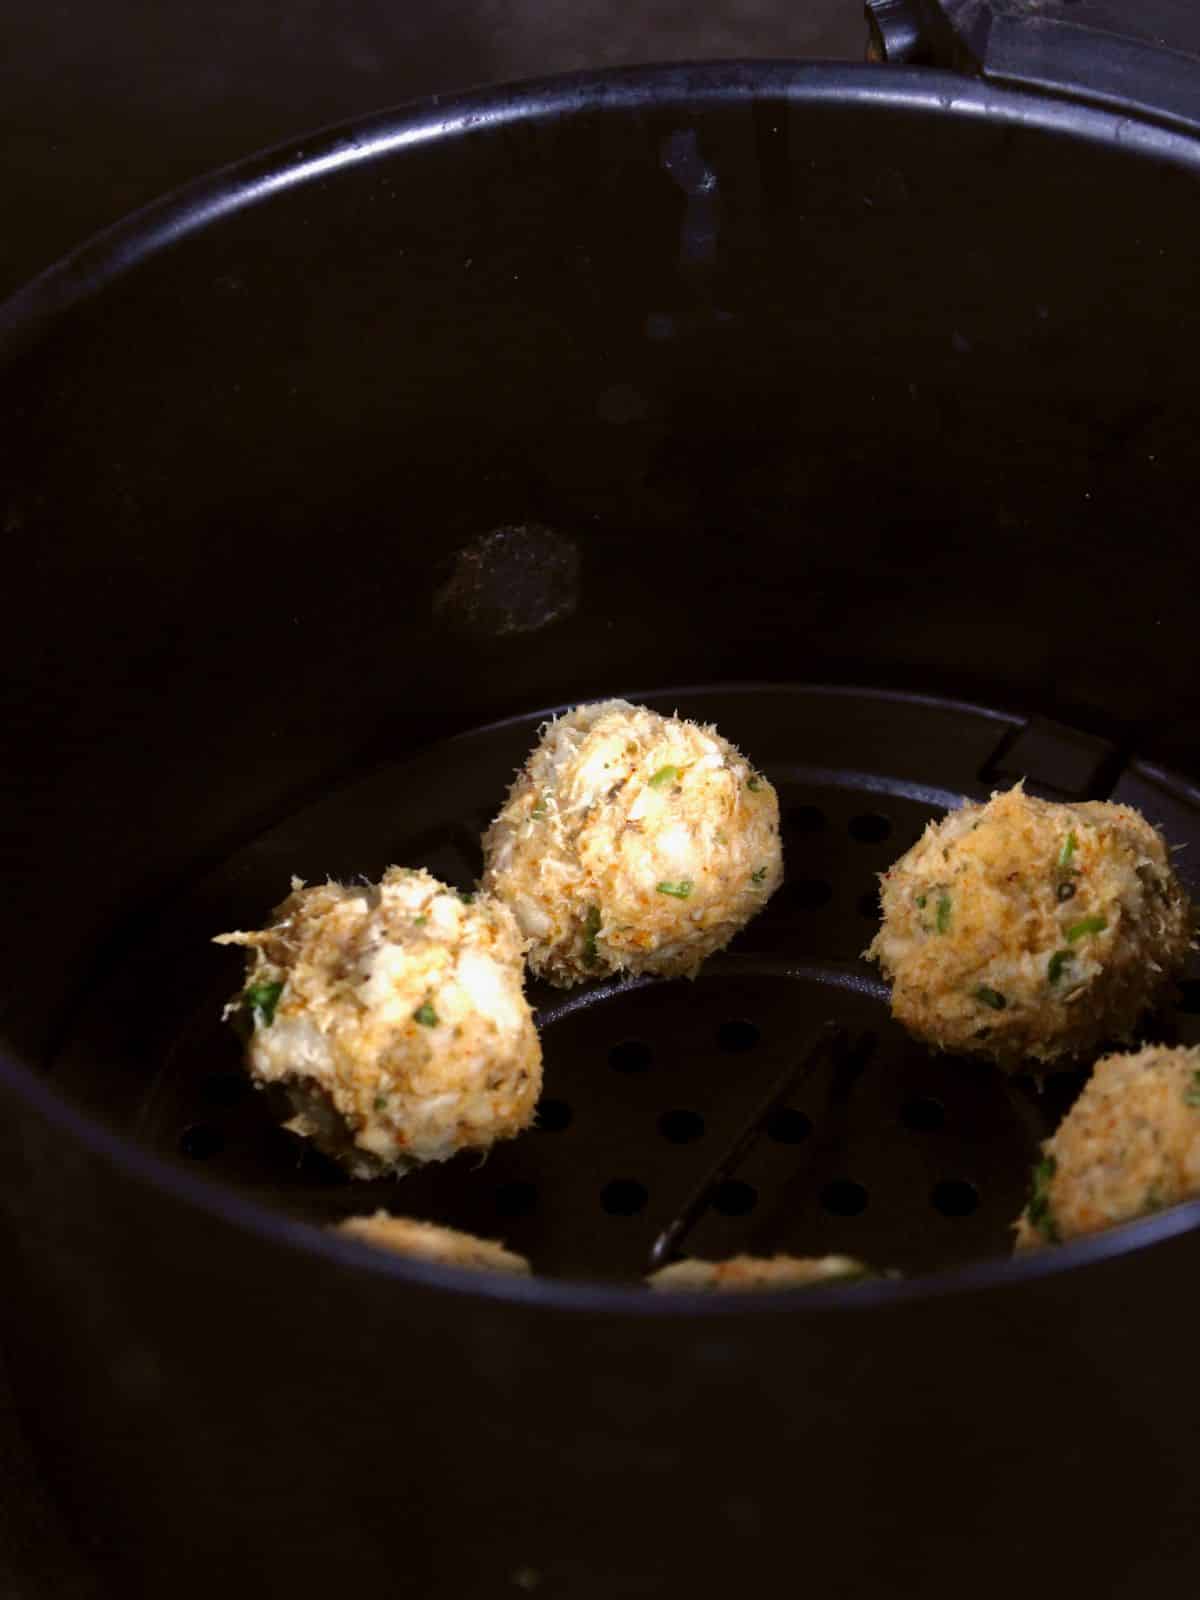 make small small balls out of the mash mixture and transfer it in an air fryer  